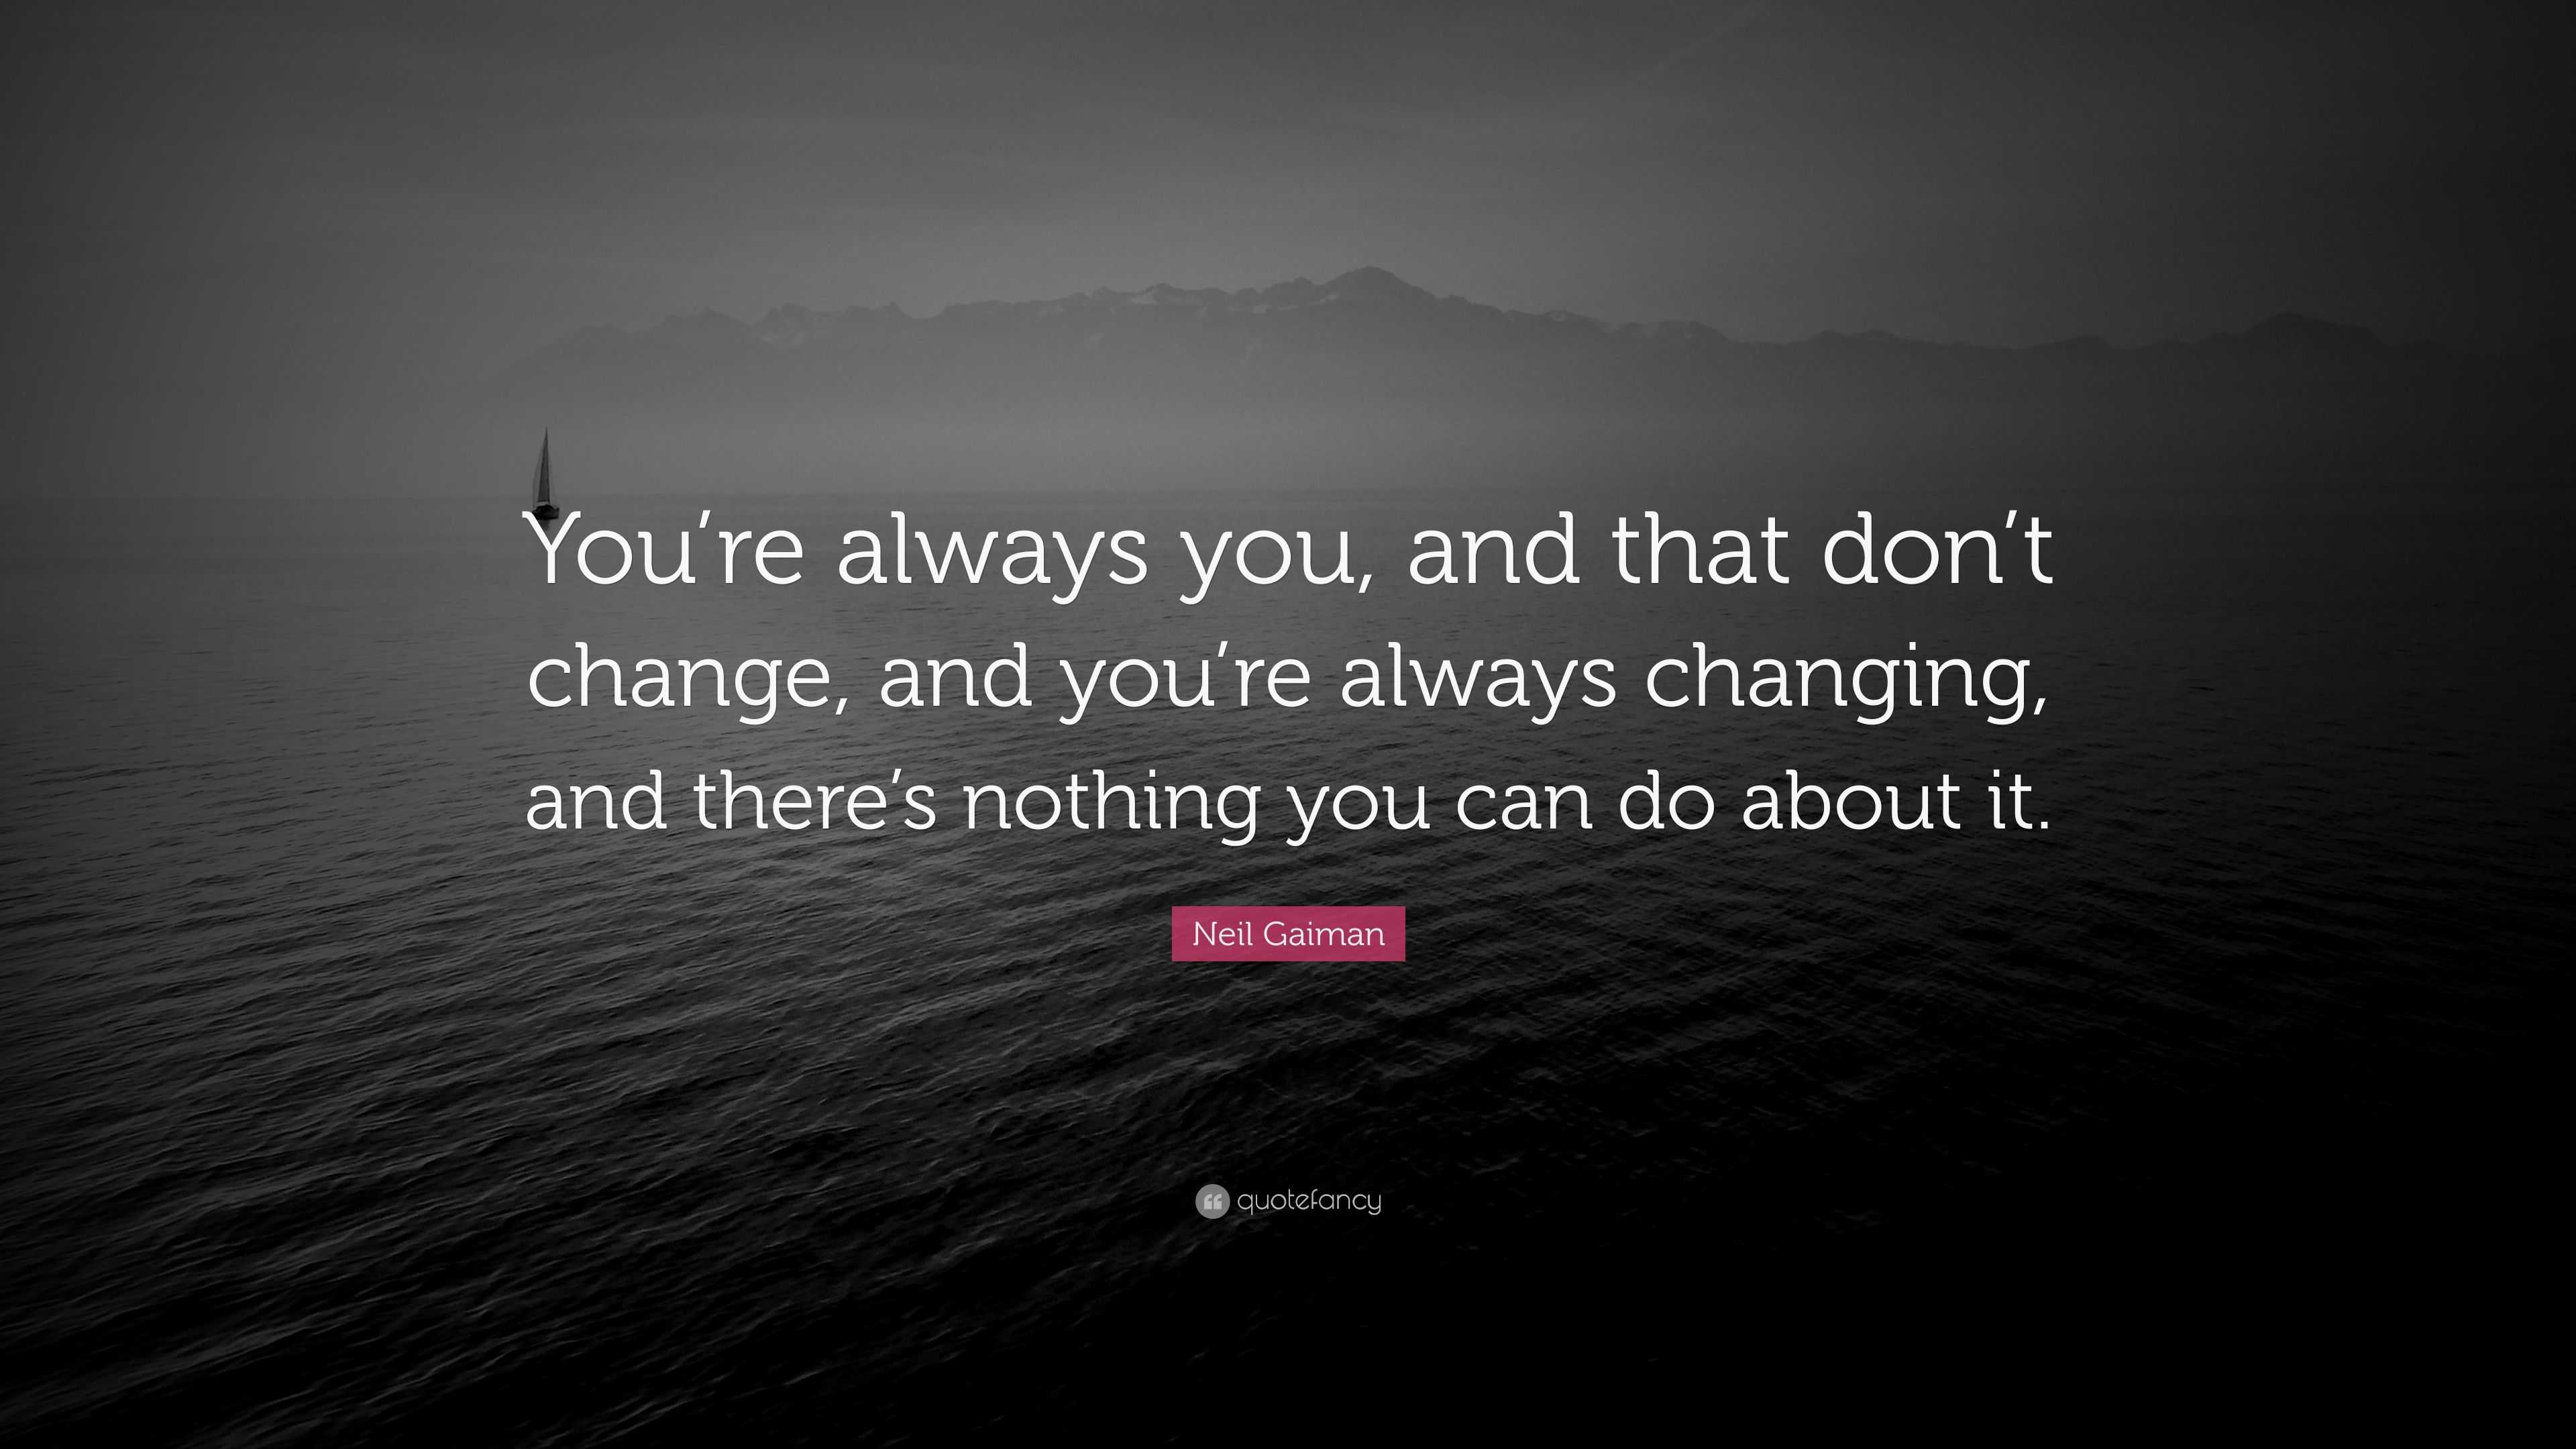 Neil Gaiman Quote: “You’re always you, and that don’t change, and you ...